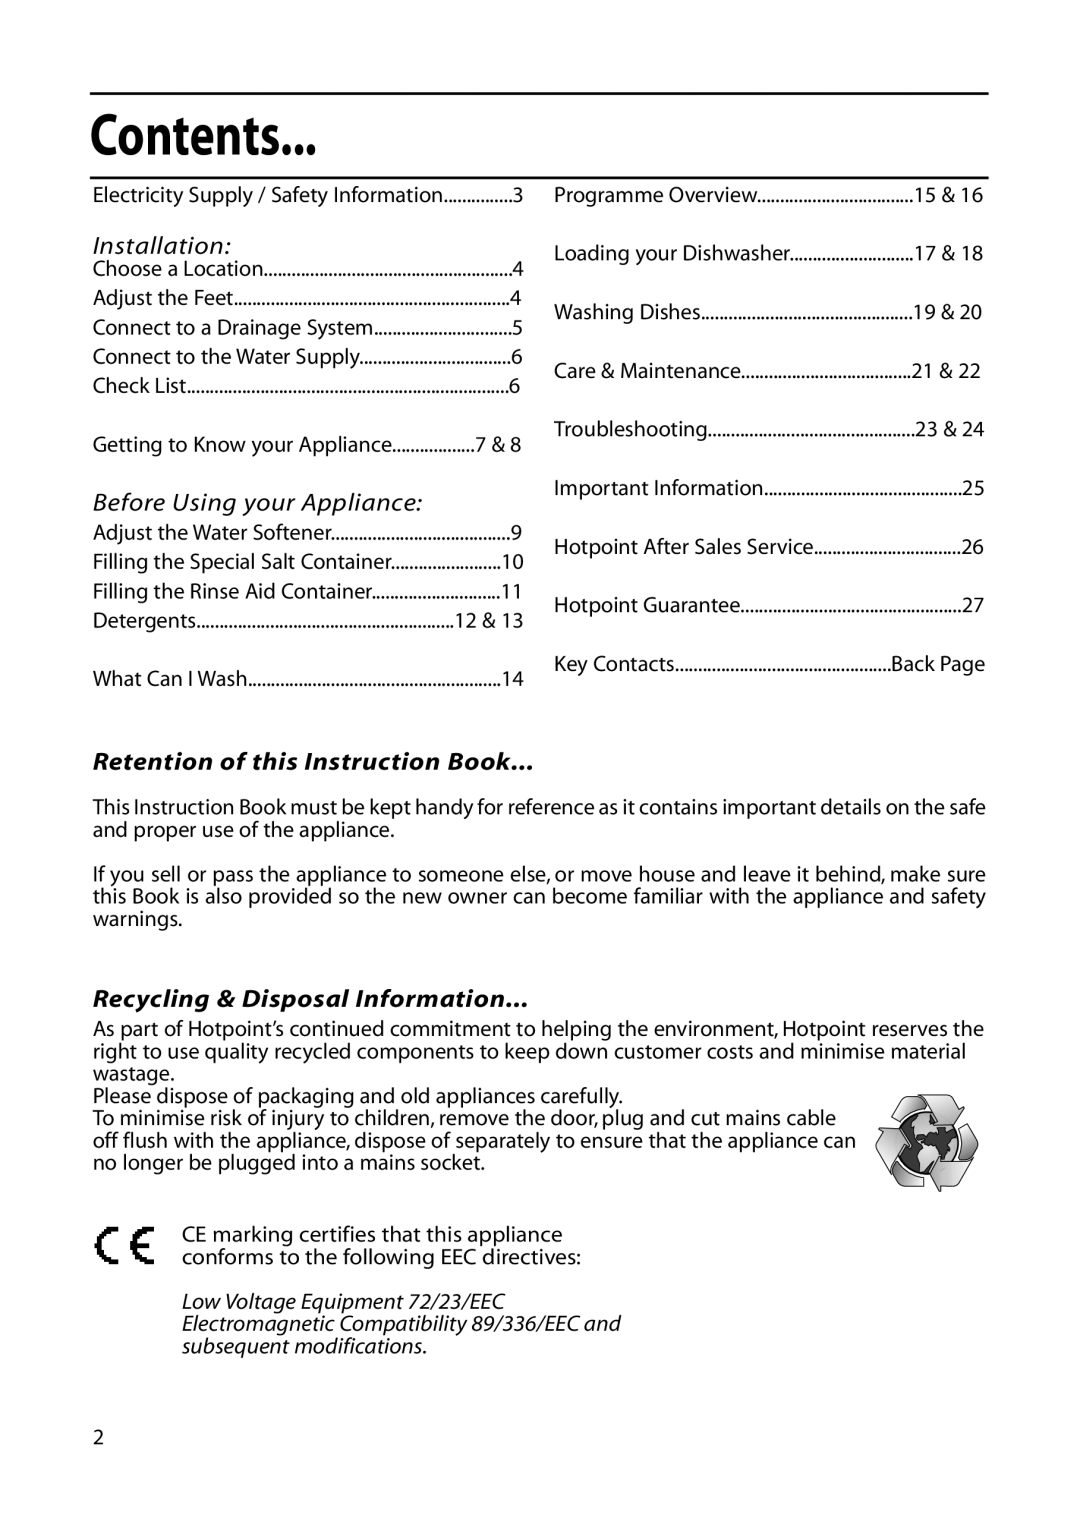 Hotpoint DWF61, DWF60 Contents, Installation, Before Using your Appliance, Retention of this Instruction Book 